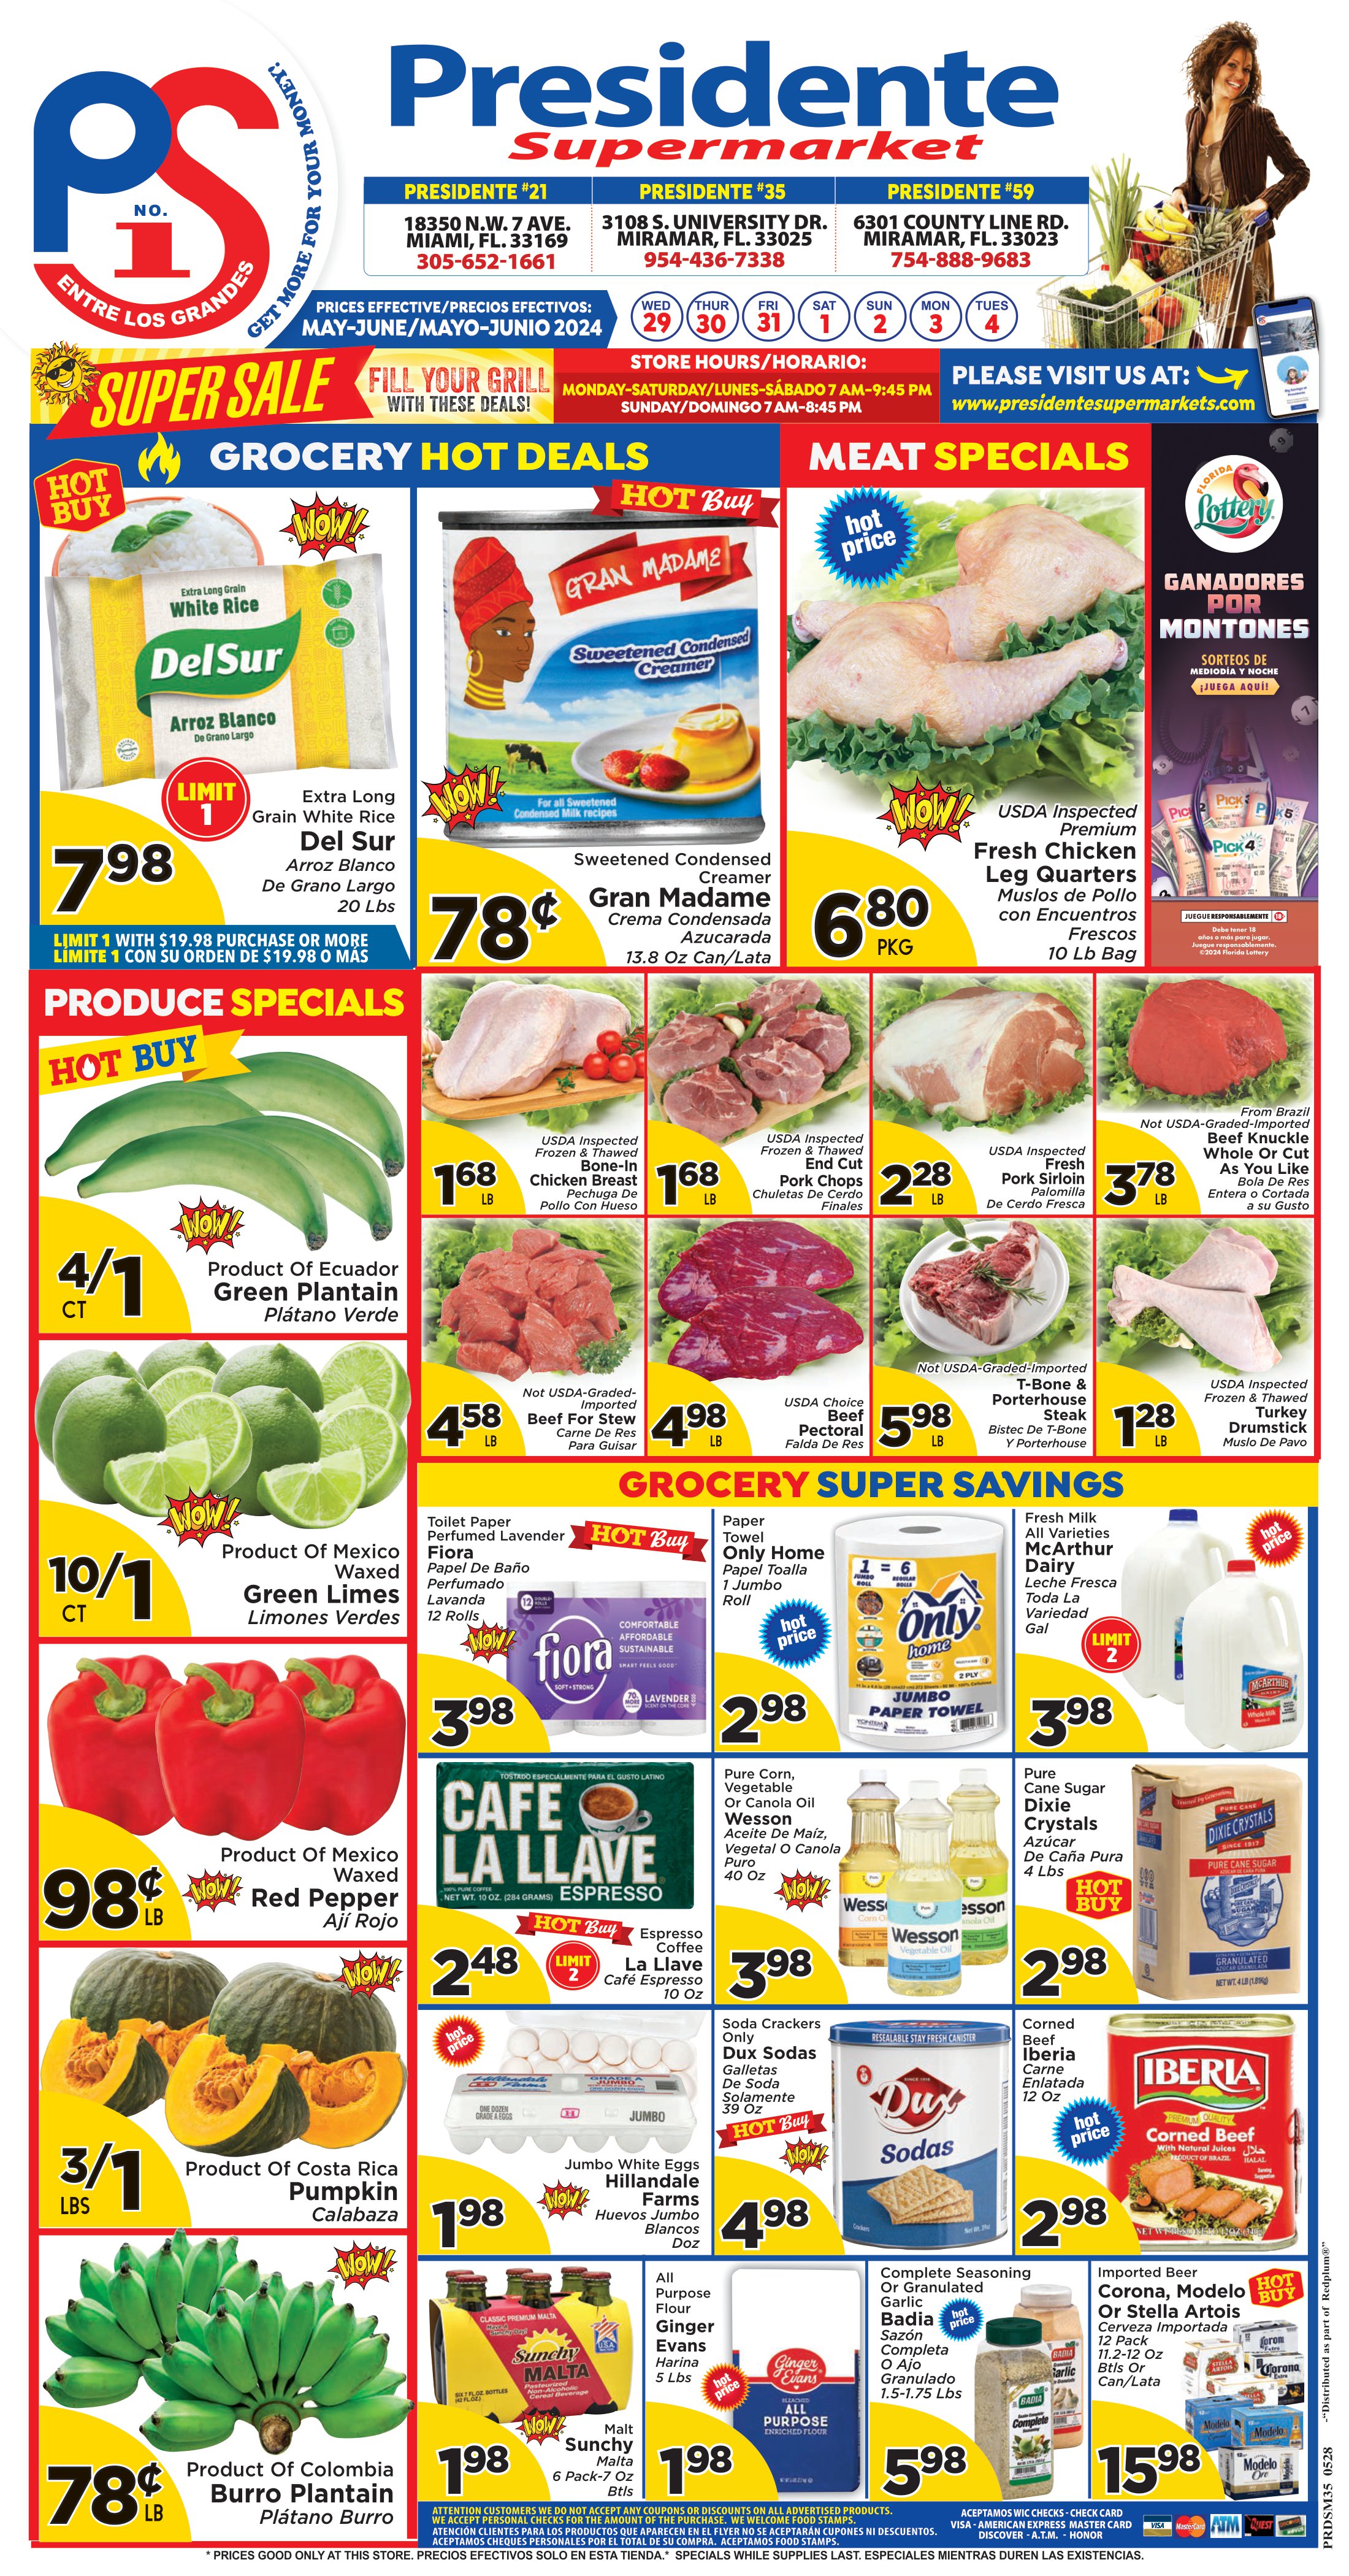 Presidente Supermarket - Weekly Promo for Stores 21, 35 and 59 Page 1